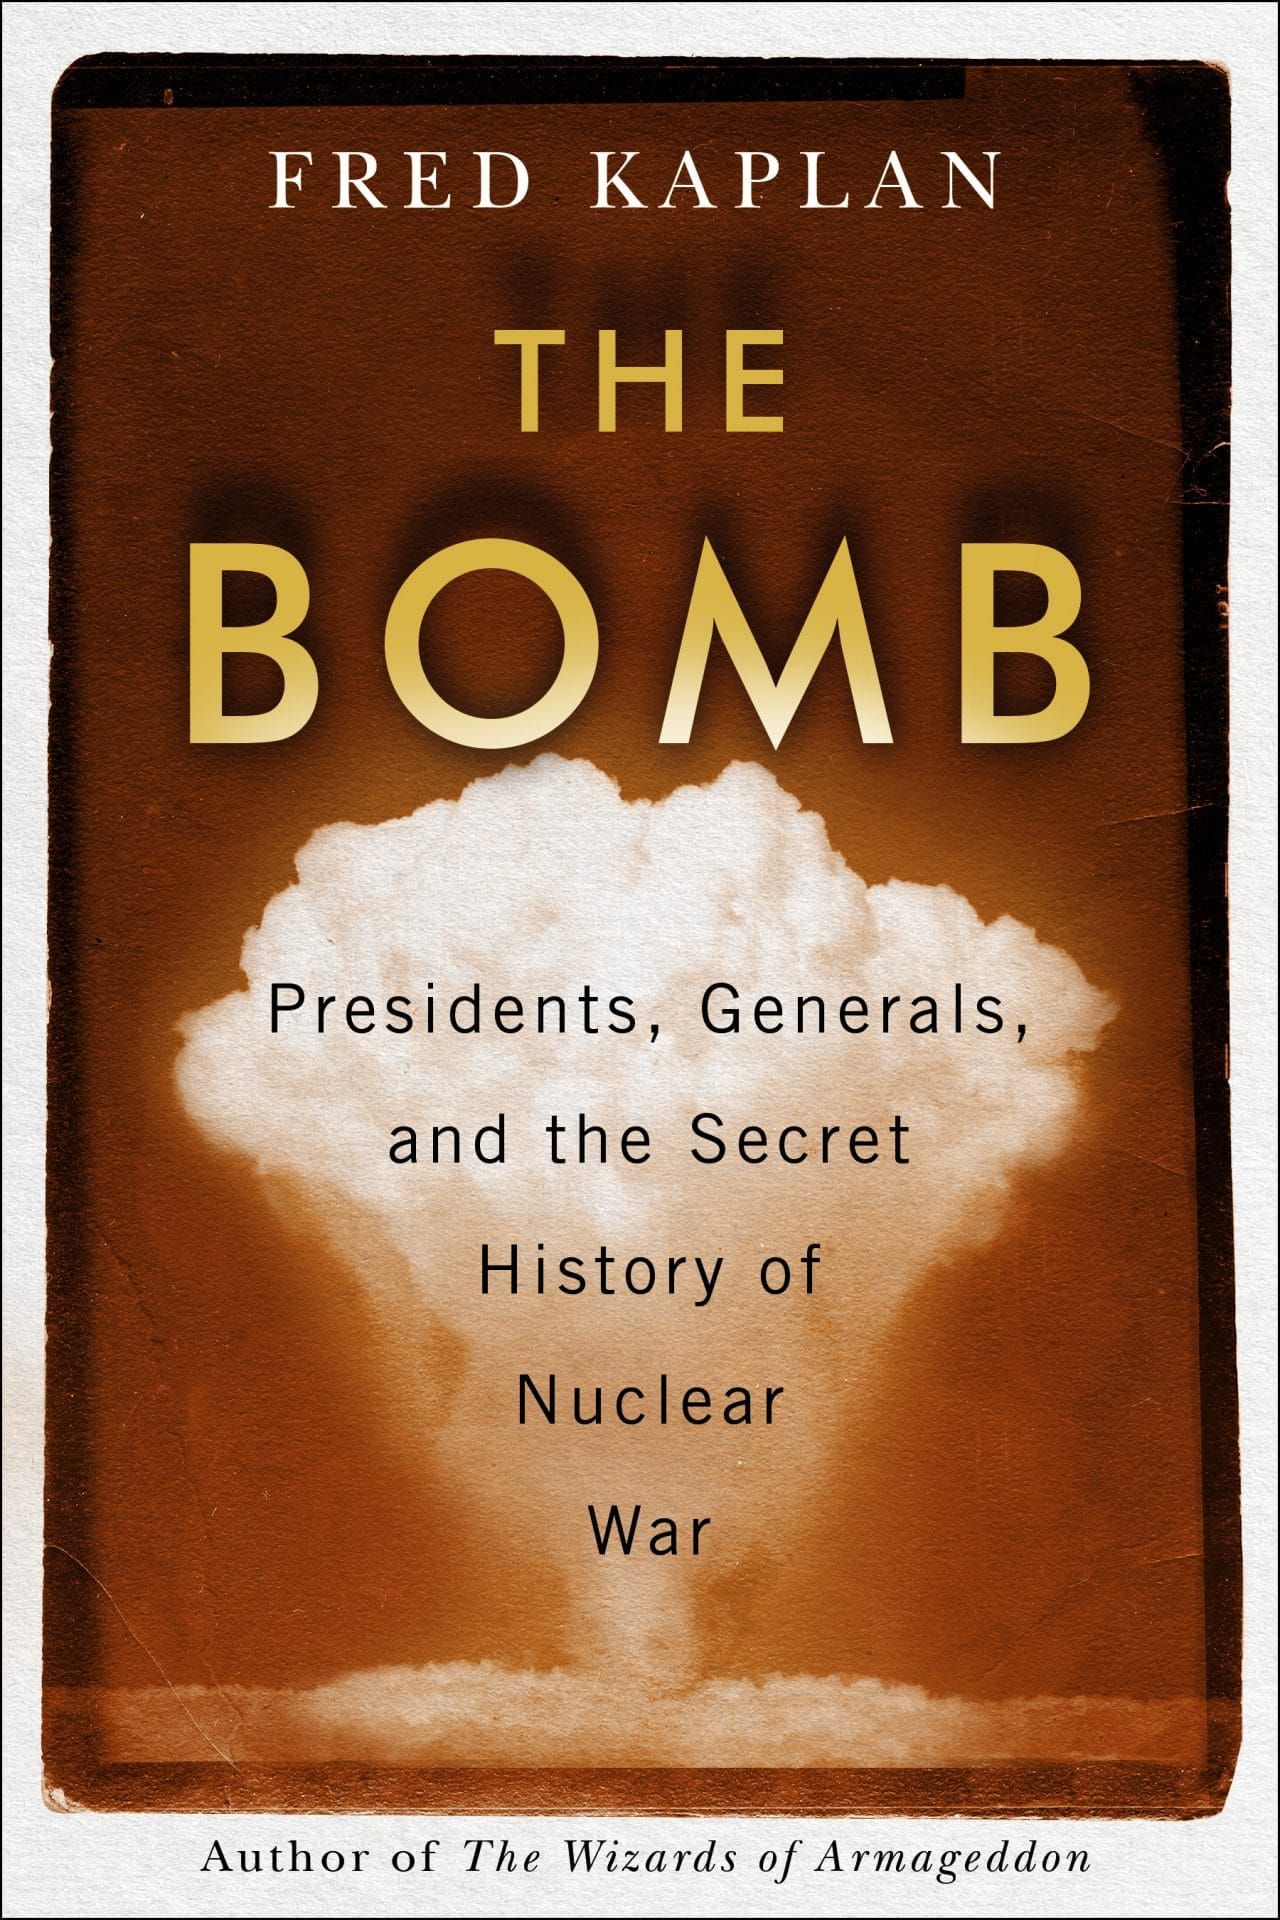 Book cover of The Bomb, by Fred Kaplan